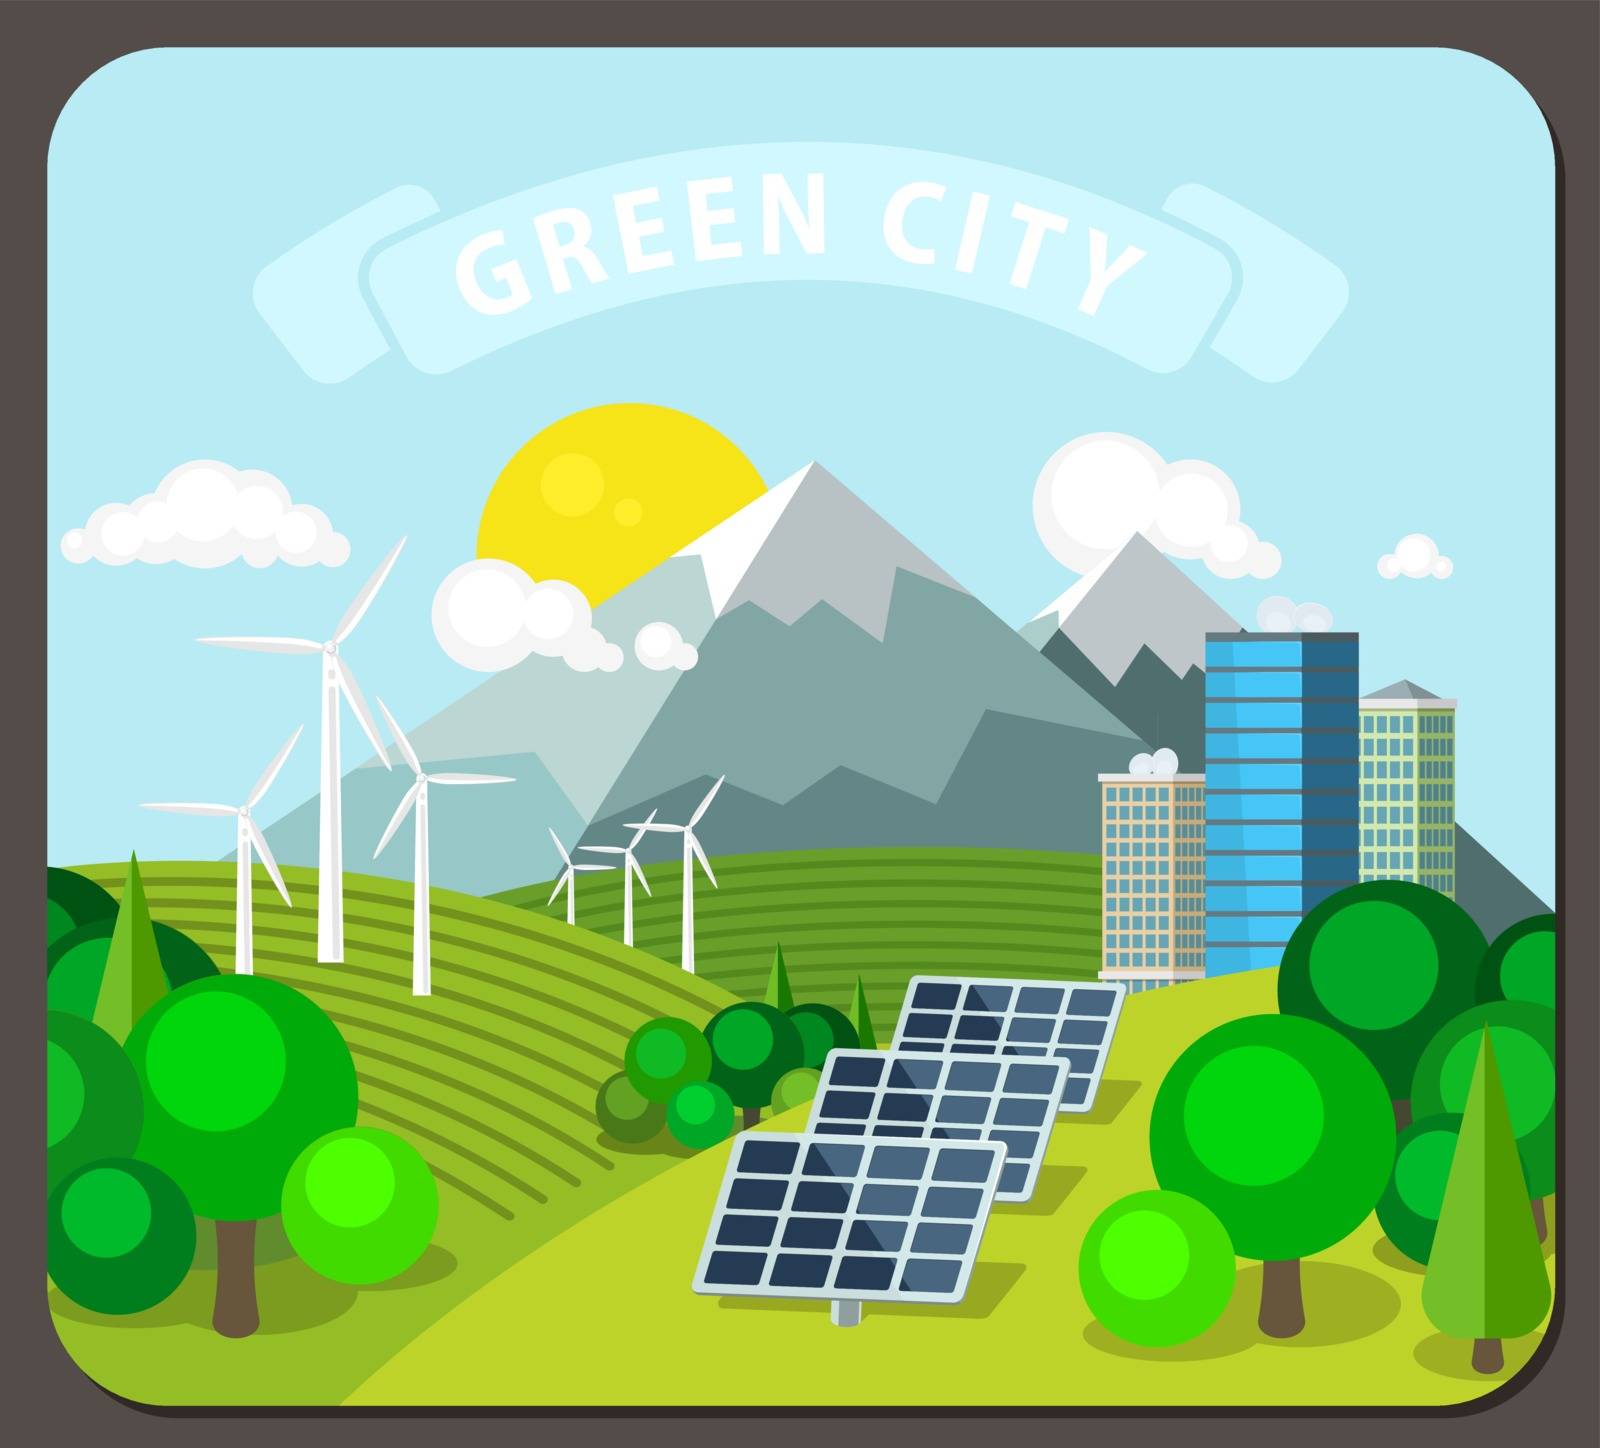 Alternative energy vector illustration. Landscape with solar and wind power stations on the background of mountains, forests and the modern city.